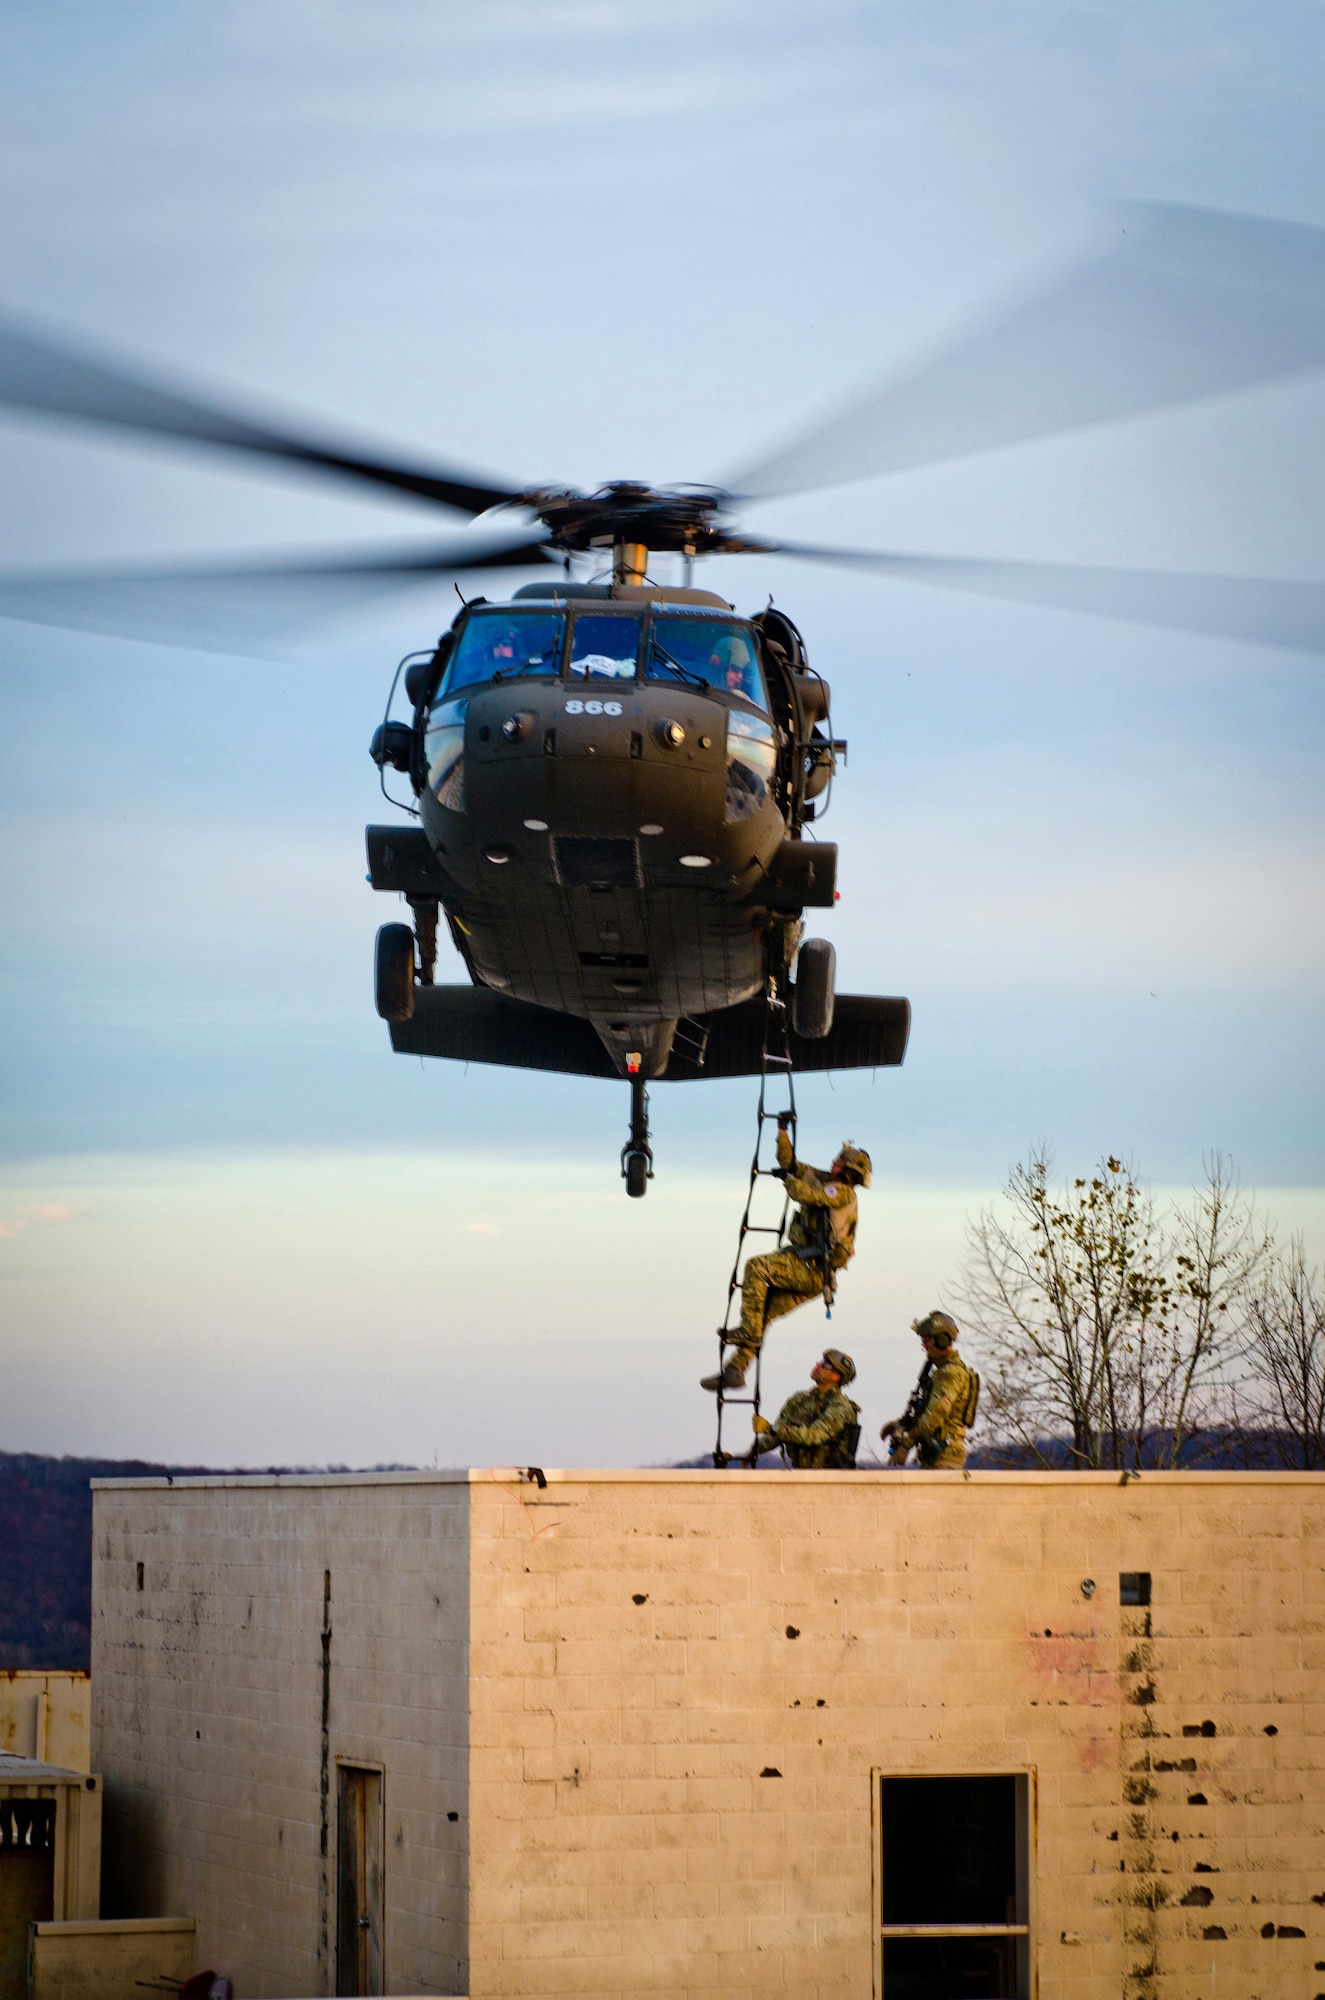 Members of the Kentucky Air National Guard’s 123rd Special Tactics Squadron climb a rope ladder onto a Kentucky Army National Guard UH-60 Blackhawk during training at Zussman Range at Fort Knox, Ky., on Nov. 21, 2013. The Airmen were practicing insertions, extractions and close-quarters combat in a simulated Afghan village. (U.S. Air National Guard photo by Master Sgt. Phil Speck)